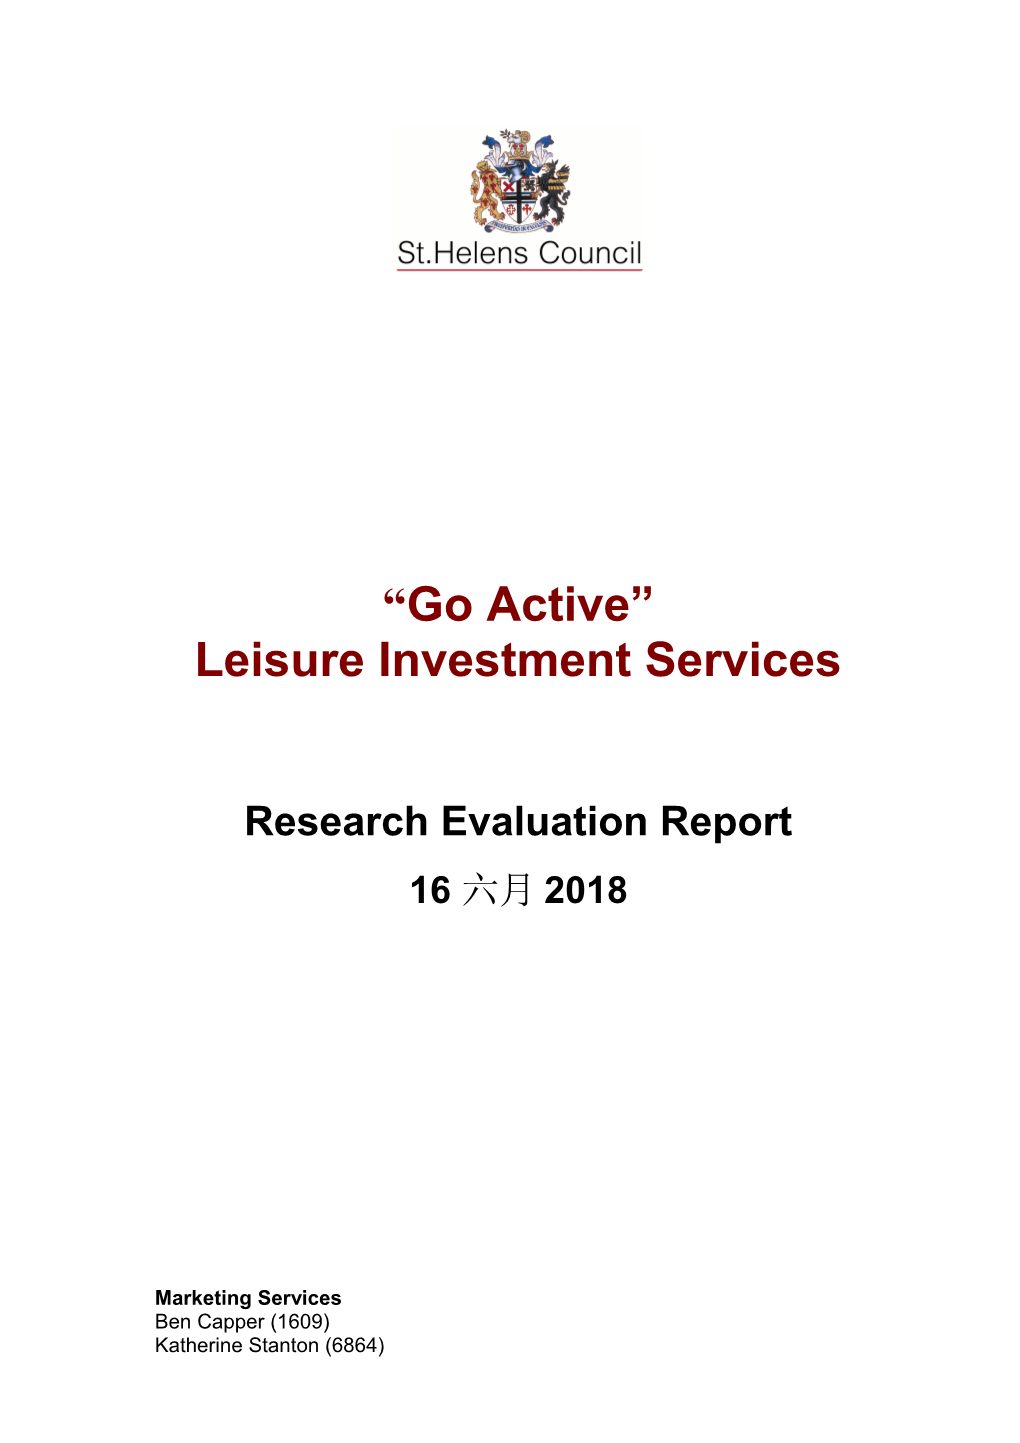 Leisure Investment Services